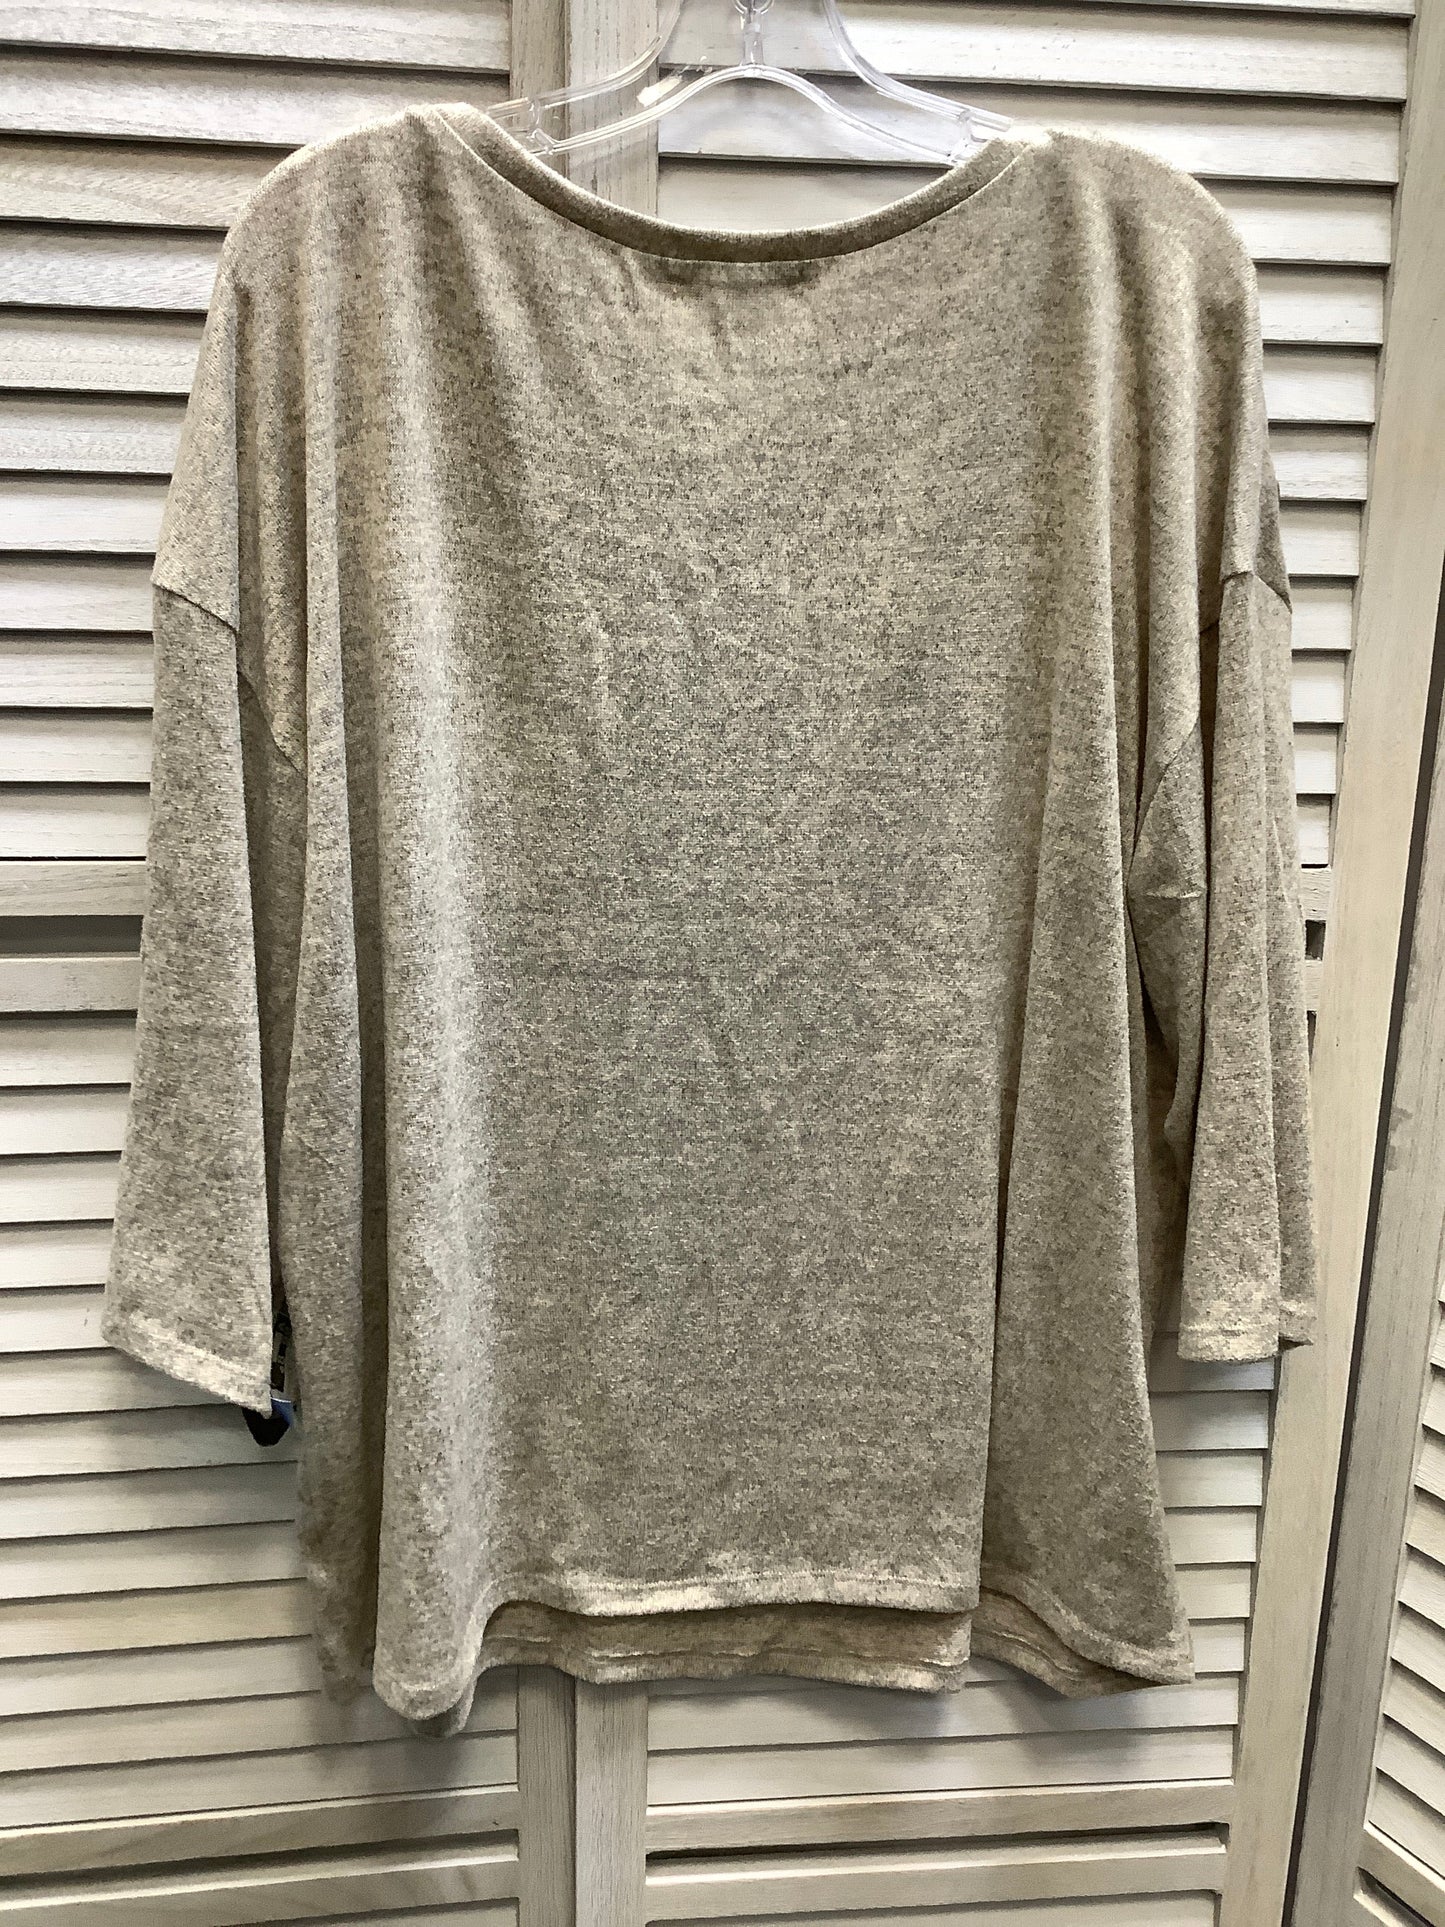 Tan Top Long Sleeve 89th And Madison, Size 2x